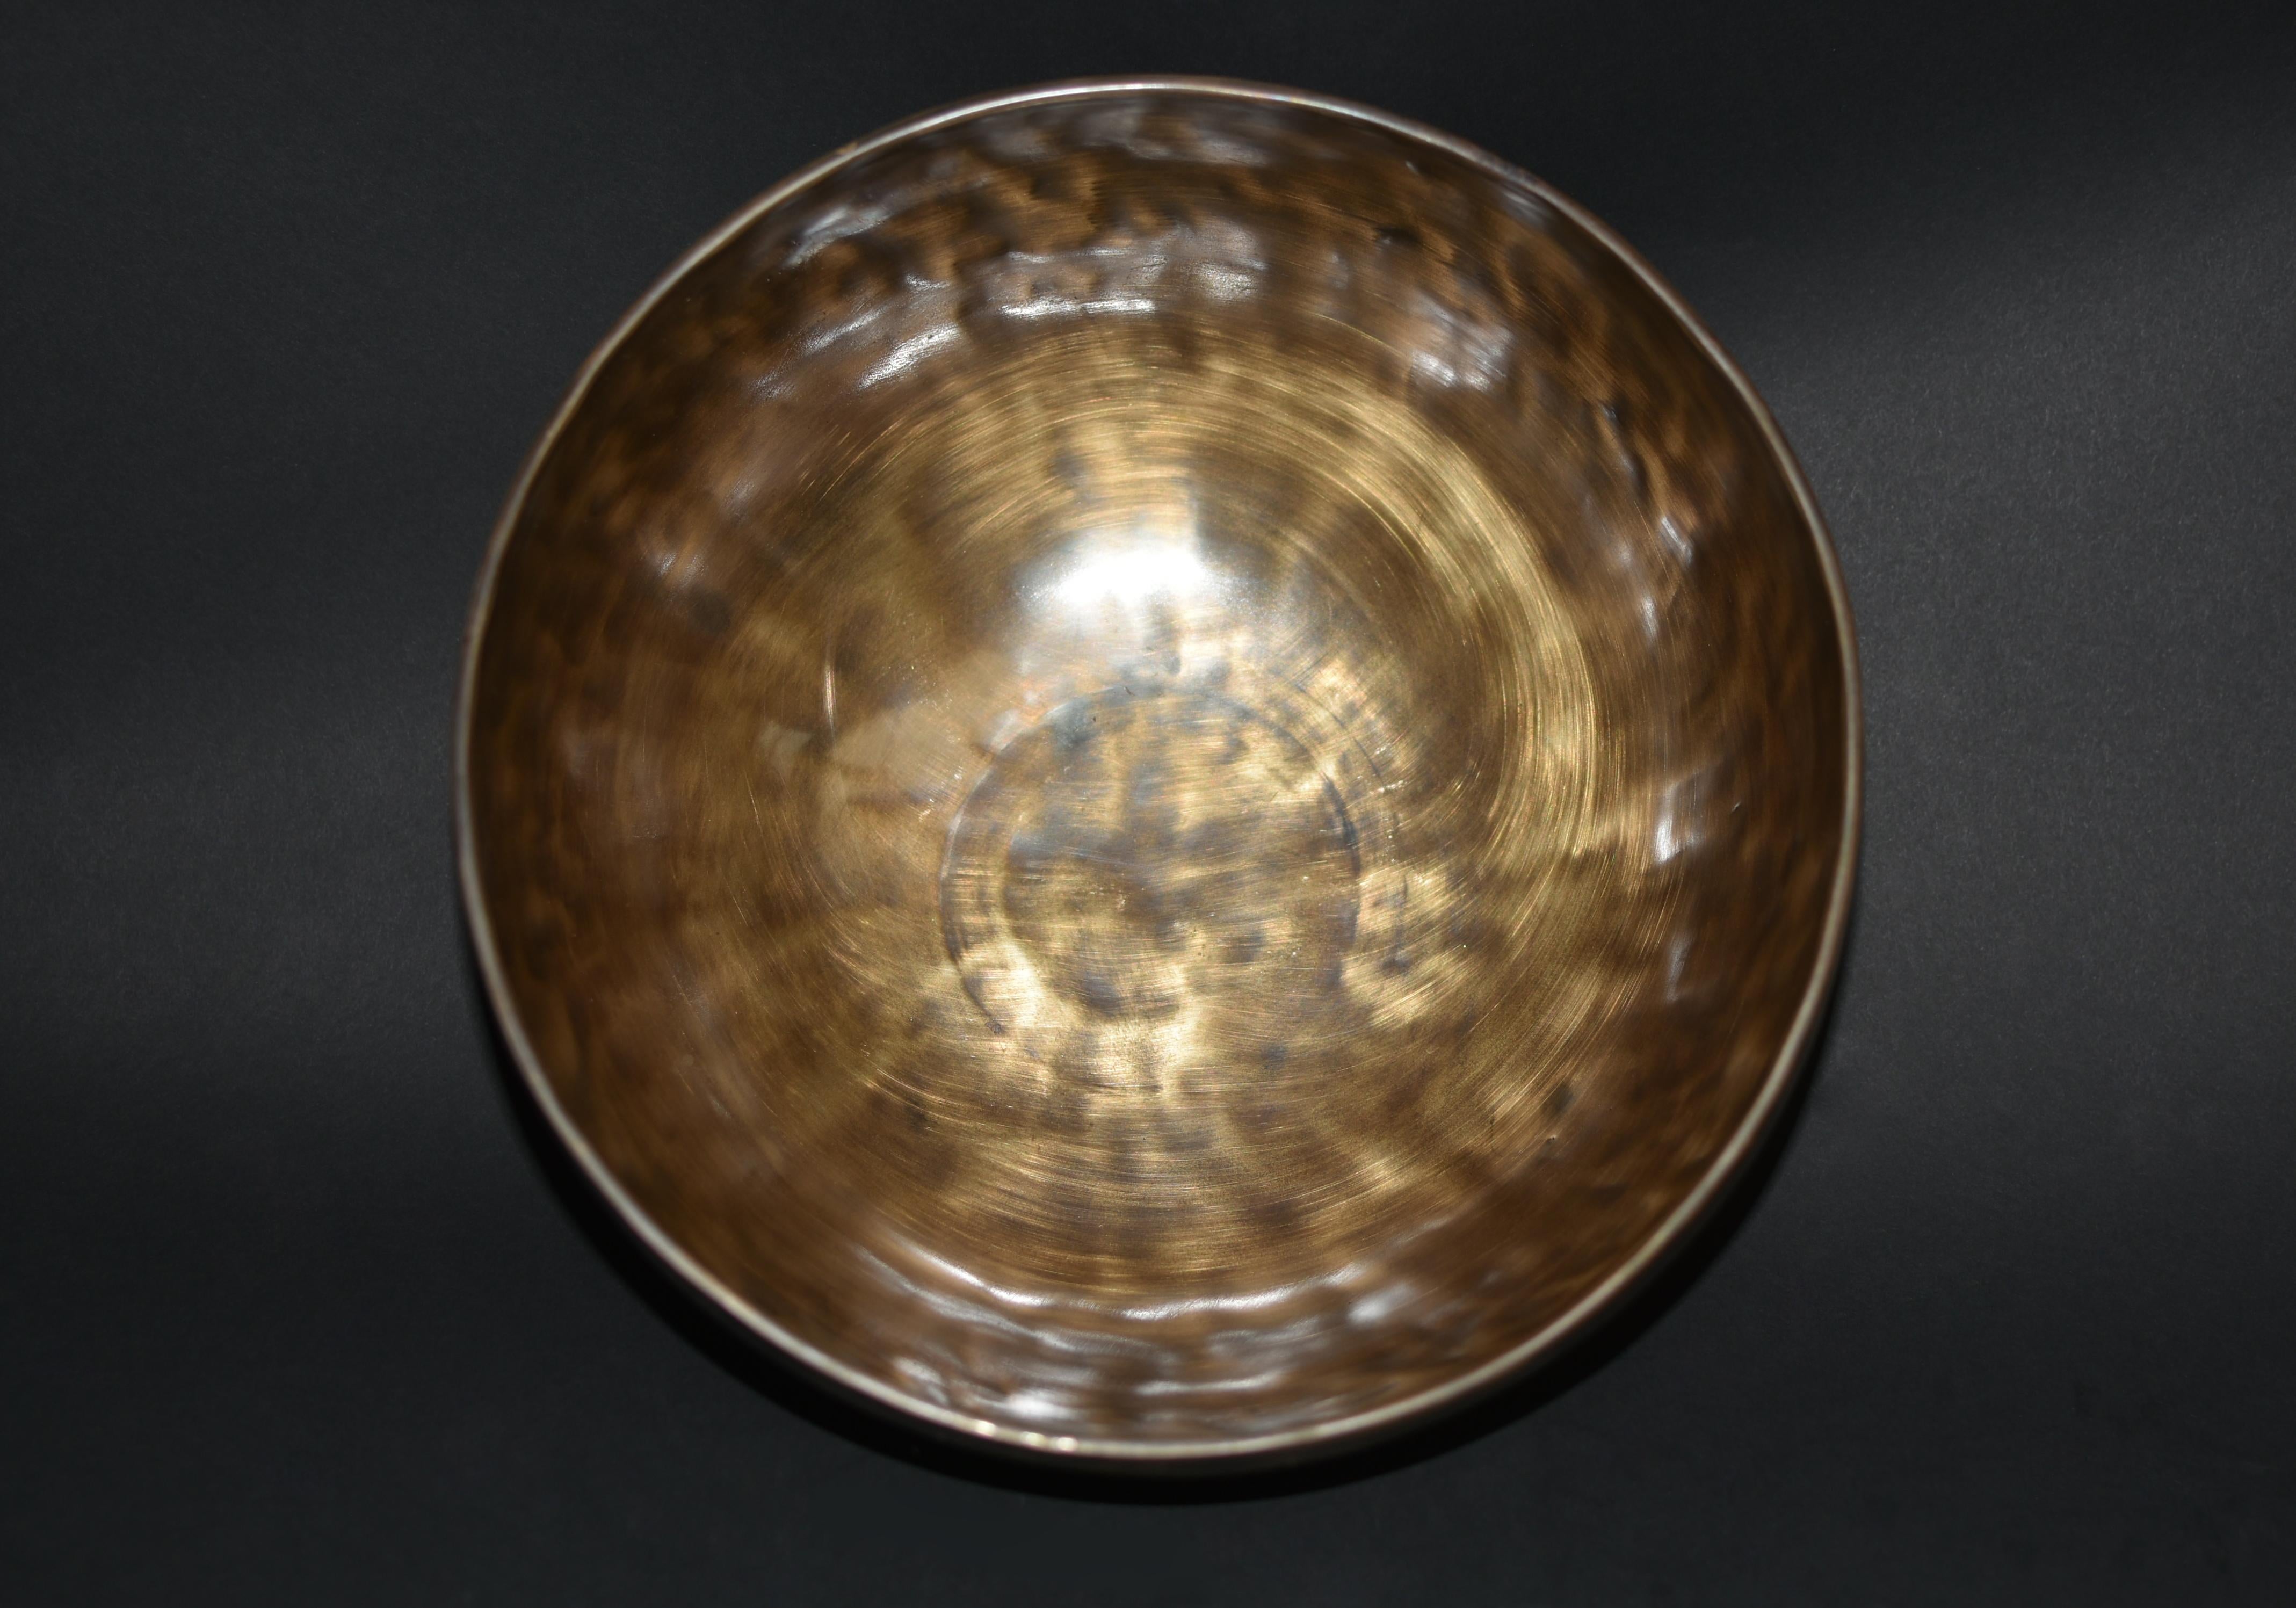 An elegant hand crafted singing bowl made by the spiritual craftsmen of Nepal. The bowl is void of decorations except a simple motif of longevity and 2 lines of Sanskrit mottos. Hand hammered, the 3.5 lb bowl has fluid vibration and beautiful tone